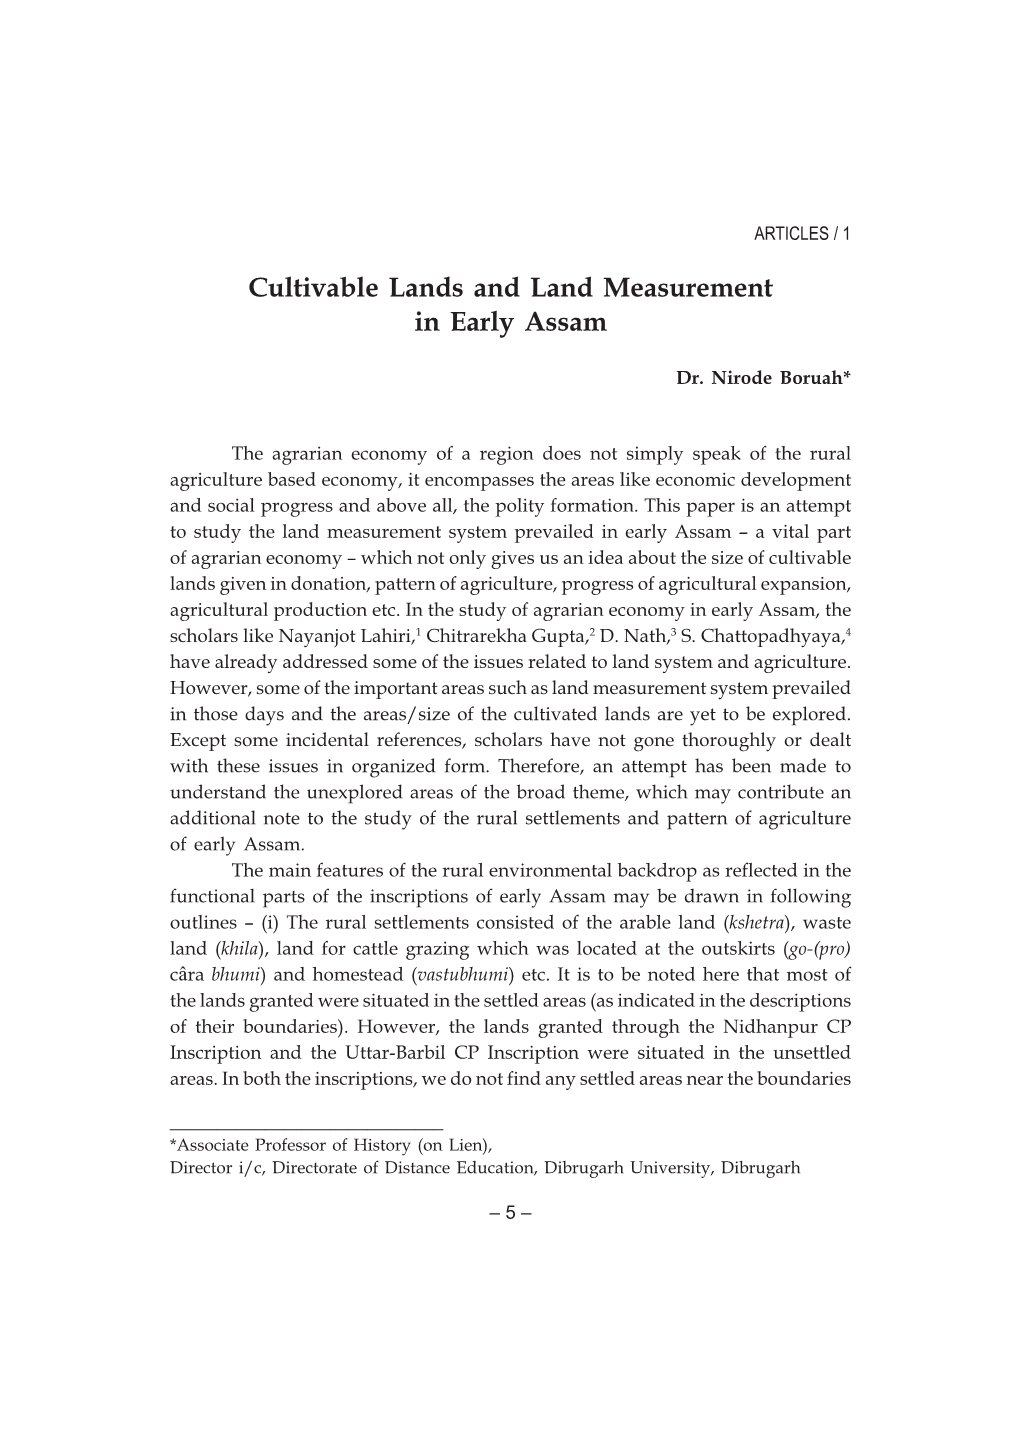 Cultivable Lands and Land Measurement in Early Assam Dr